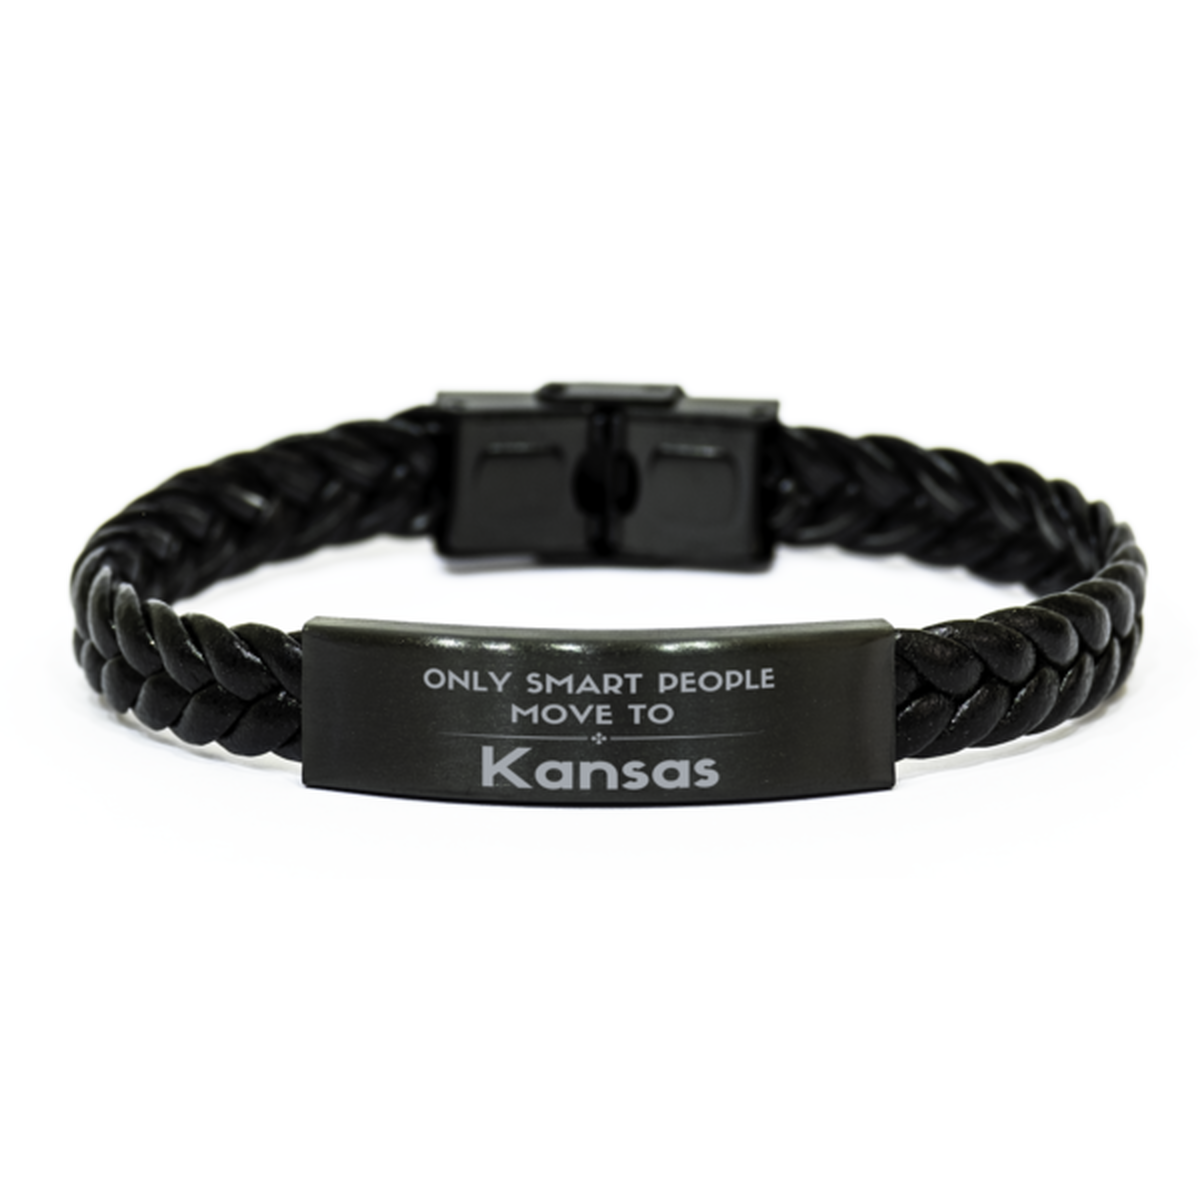 Only smart people move to Kansas Braided Leather Bracelet, Gag Gifts For Kansas, Move to Kansas Gifts for Friends Coworker Funny Saying Quote